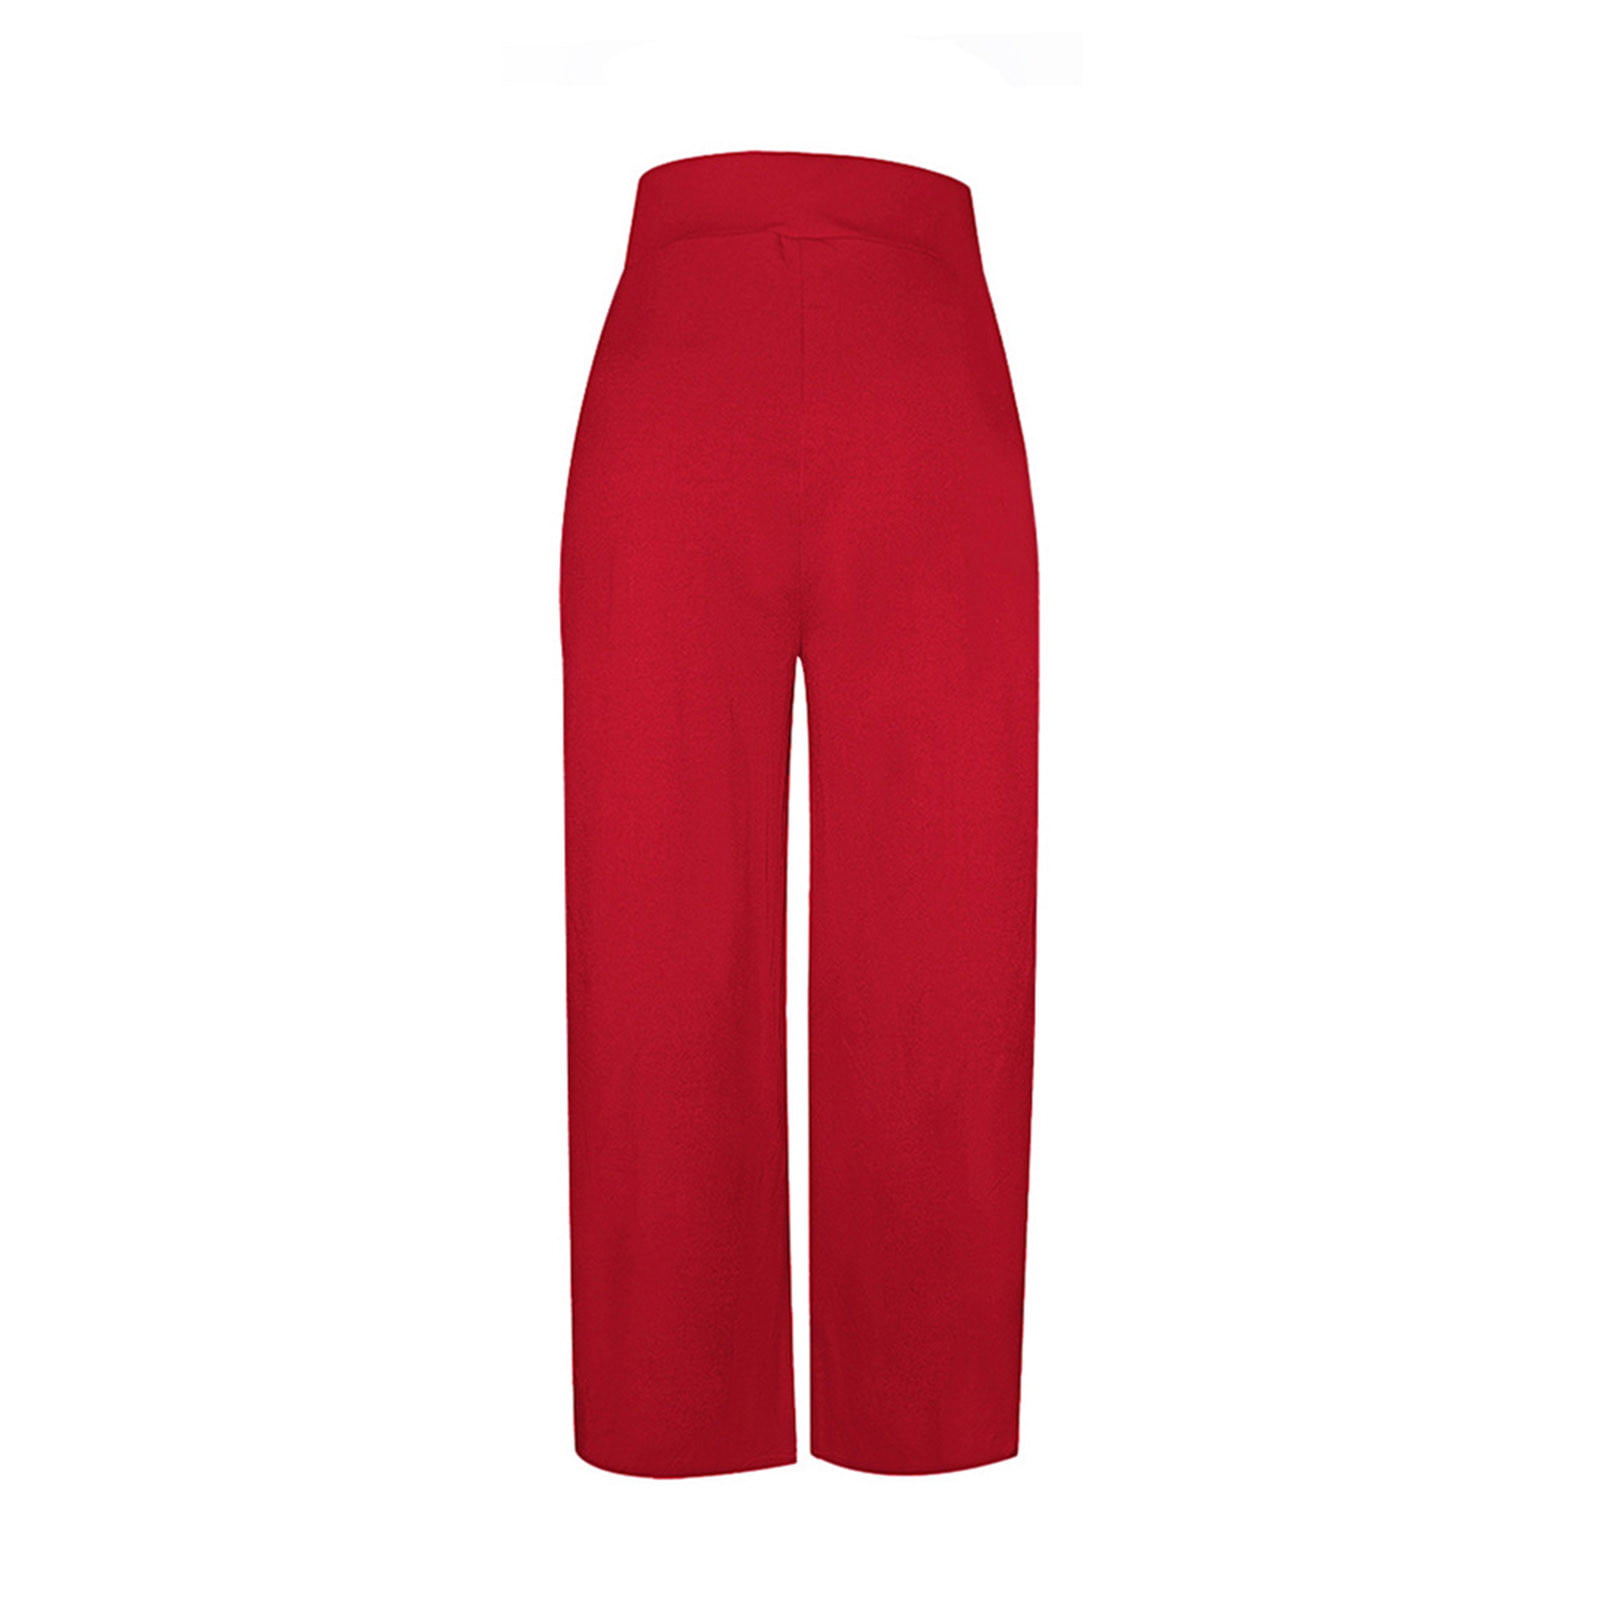 Intense red high waisted pleated stretch Trousers